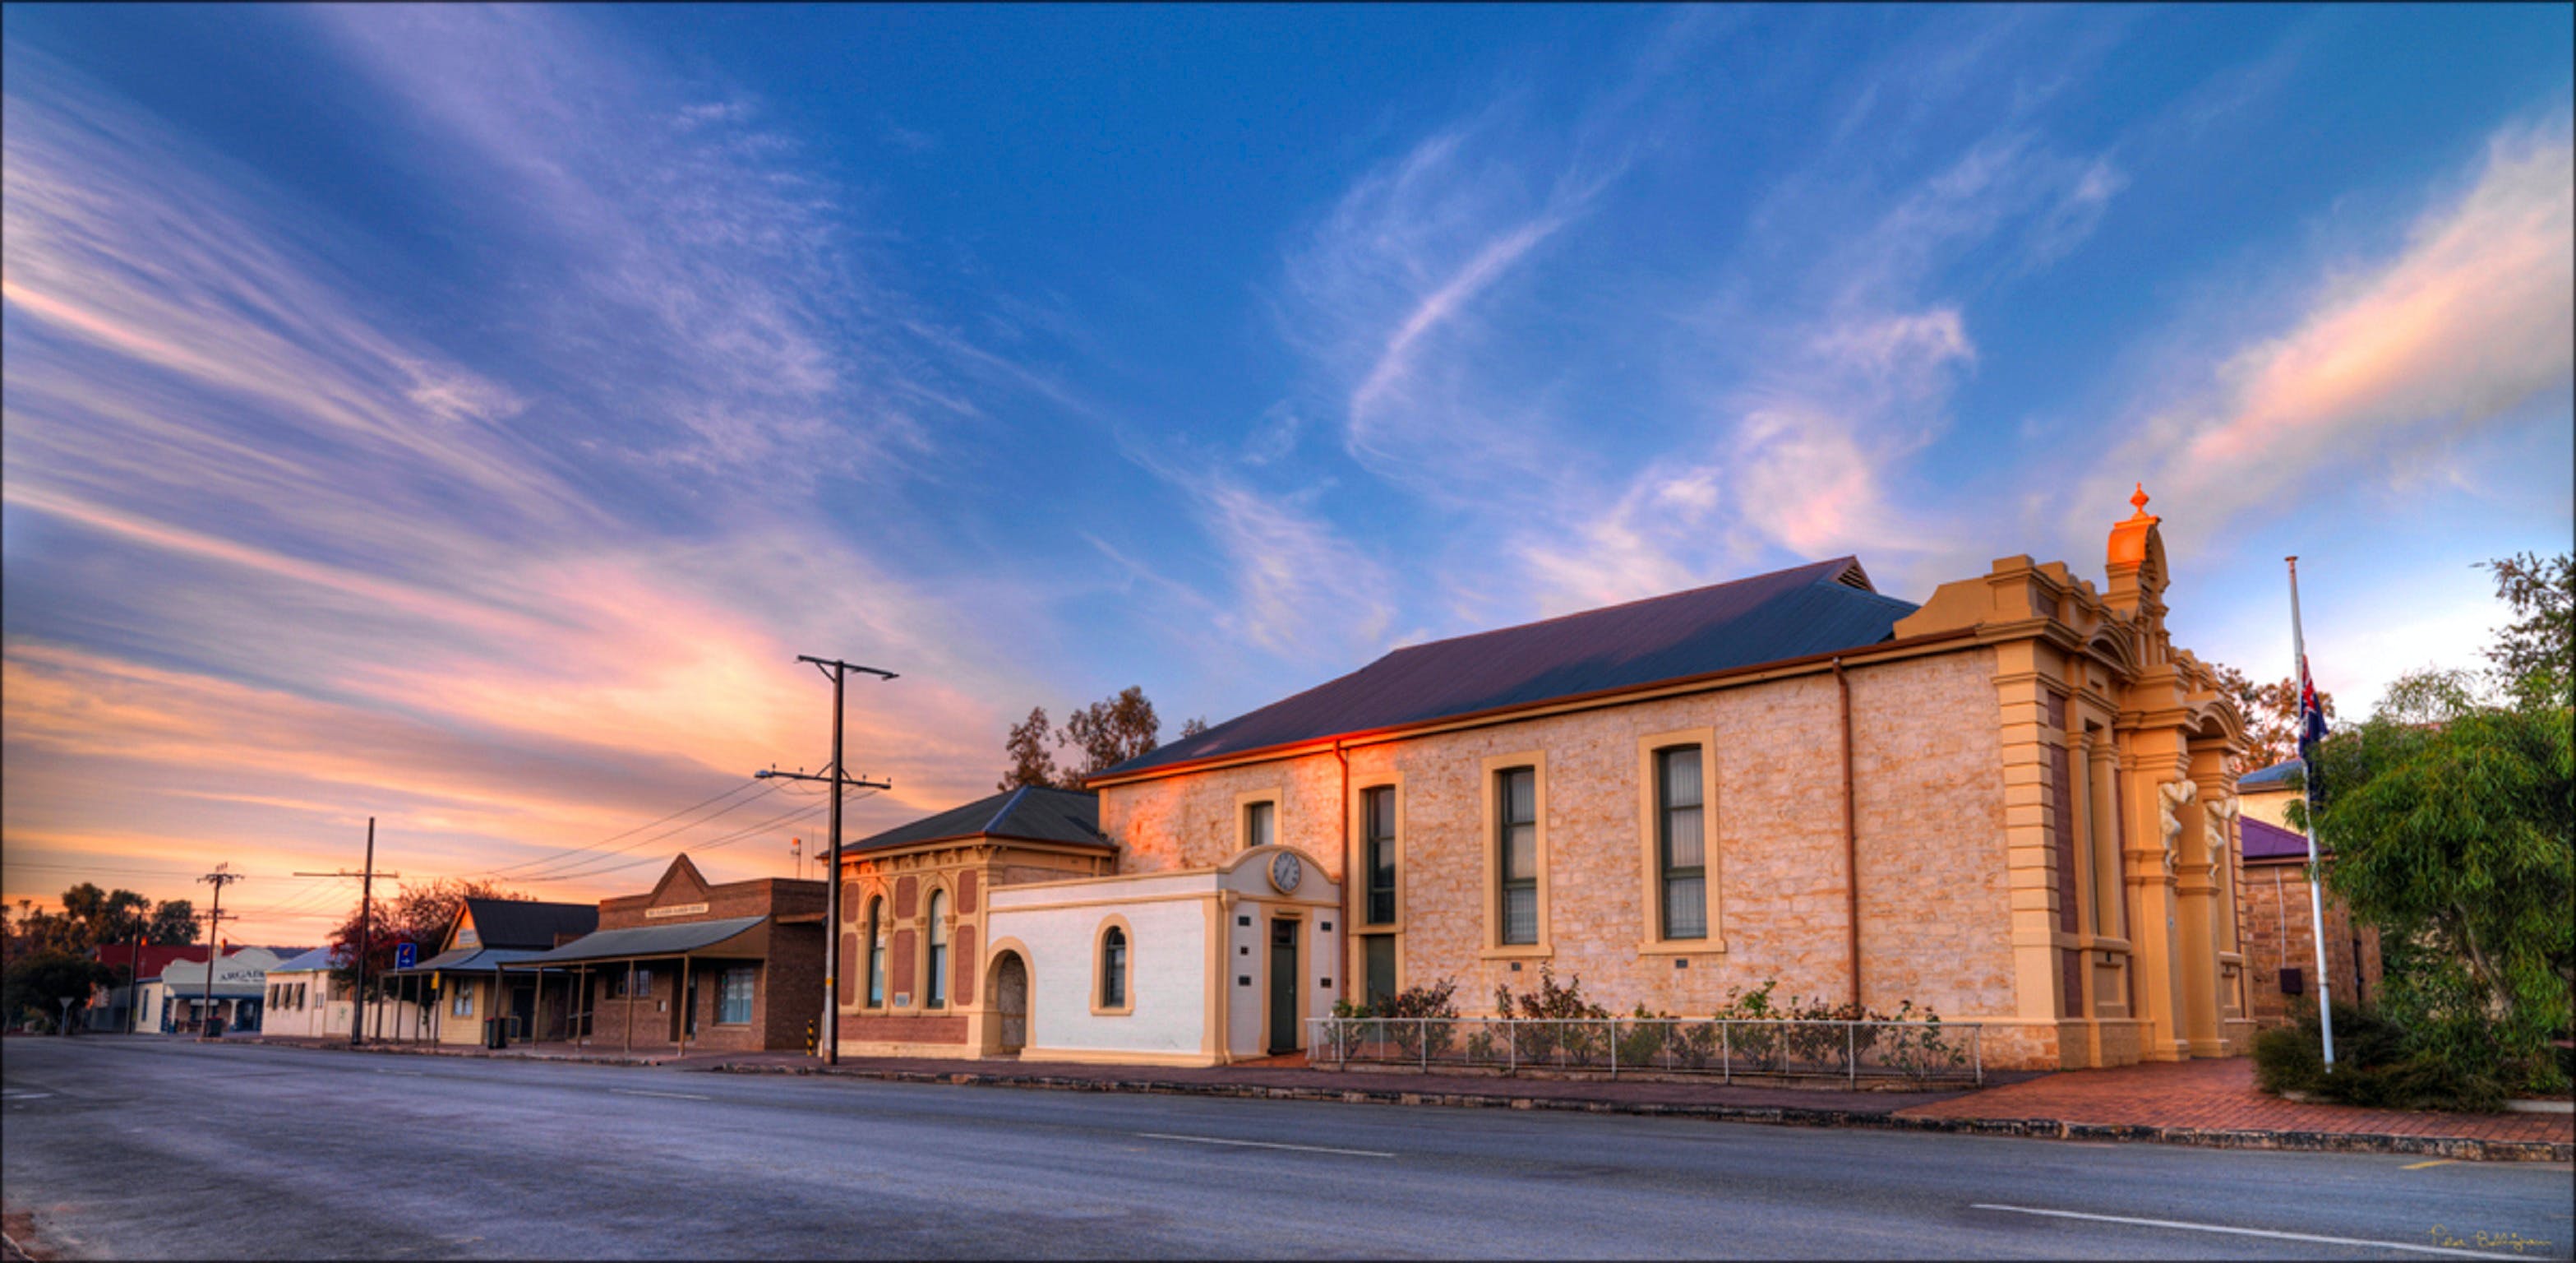 Quorn Historic Building Walk - Accommodation Bookings